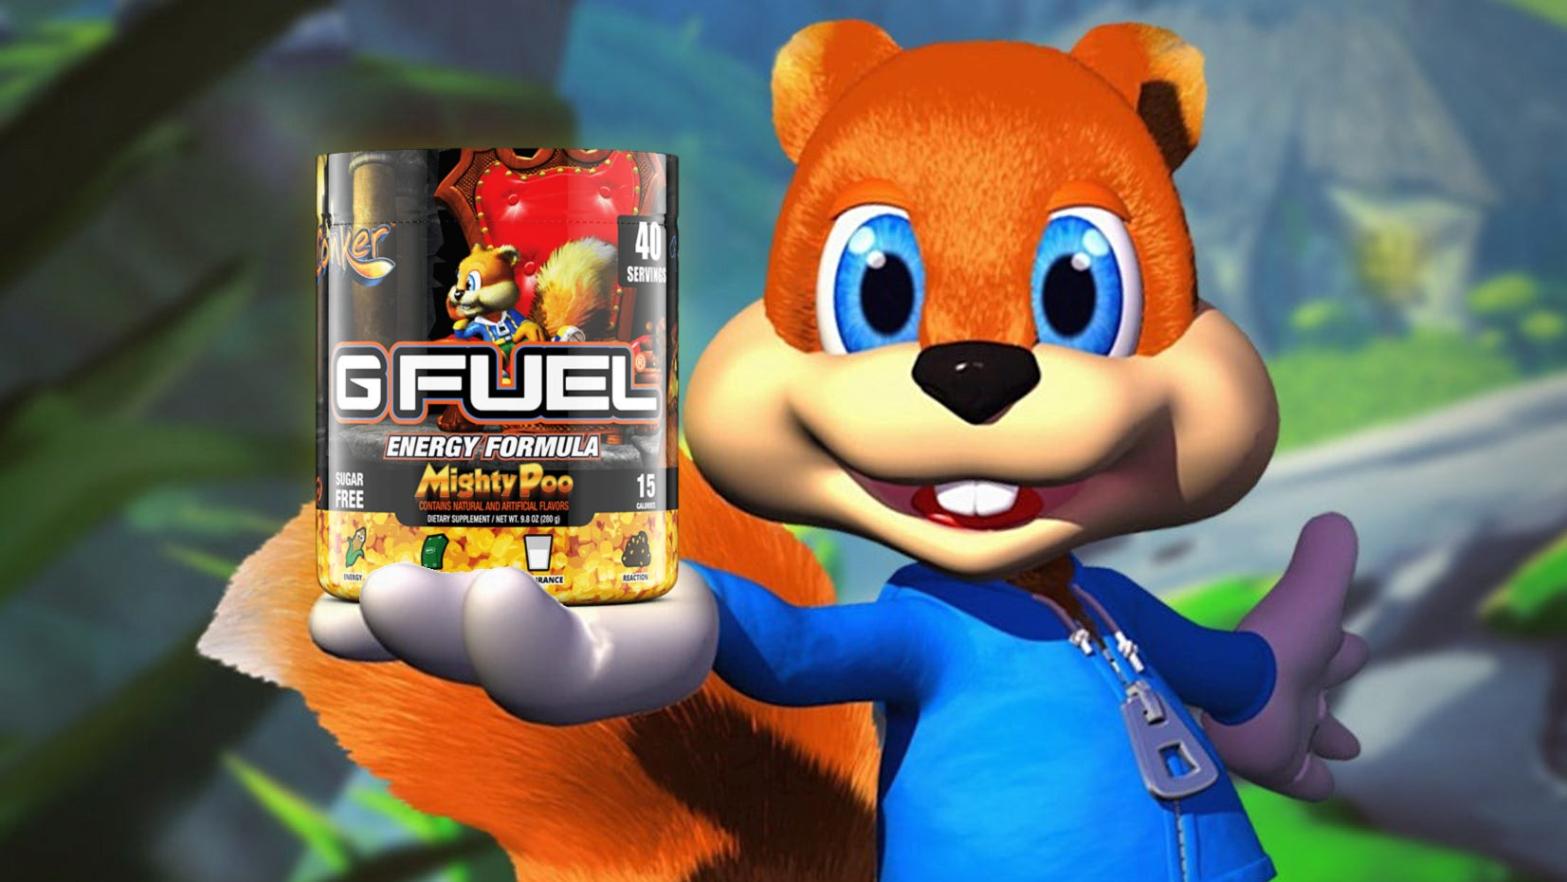 If only he was getting energised for a new game. (Image: Microsoft/G Fuel/Kotaku)